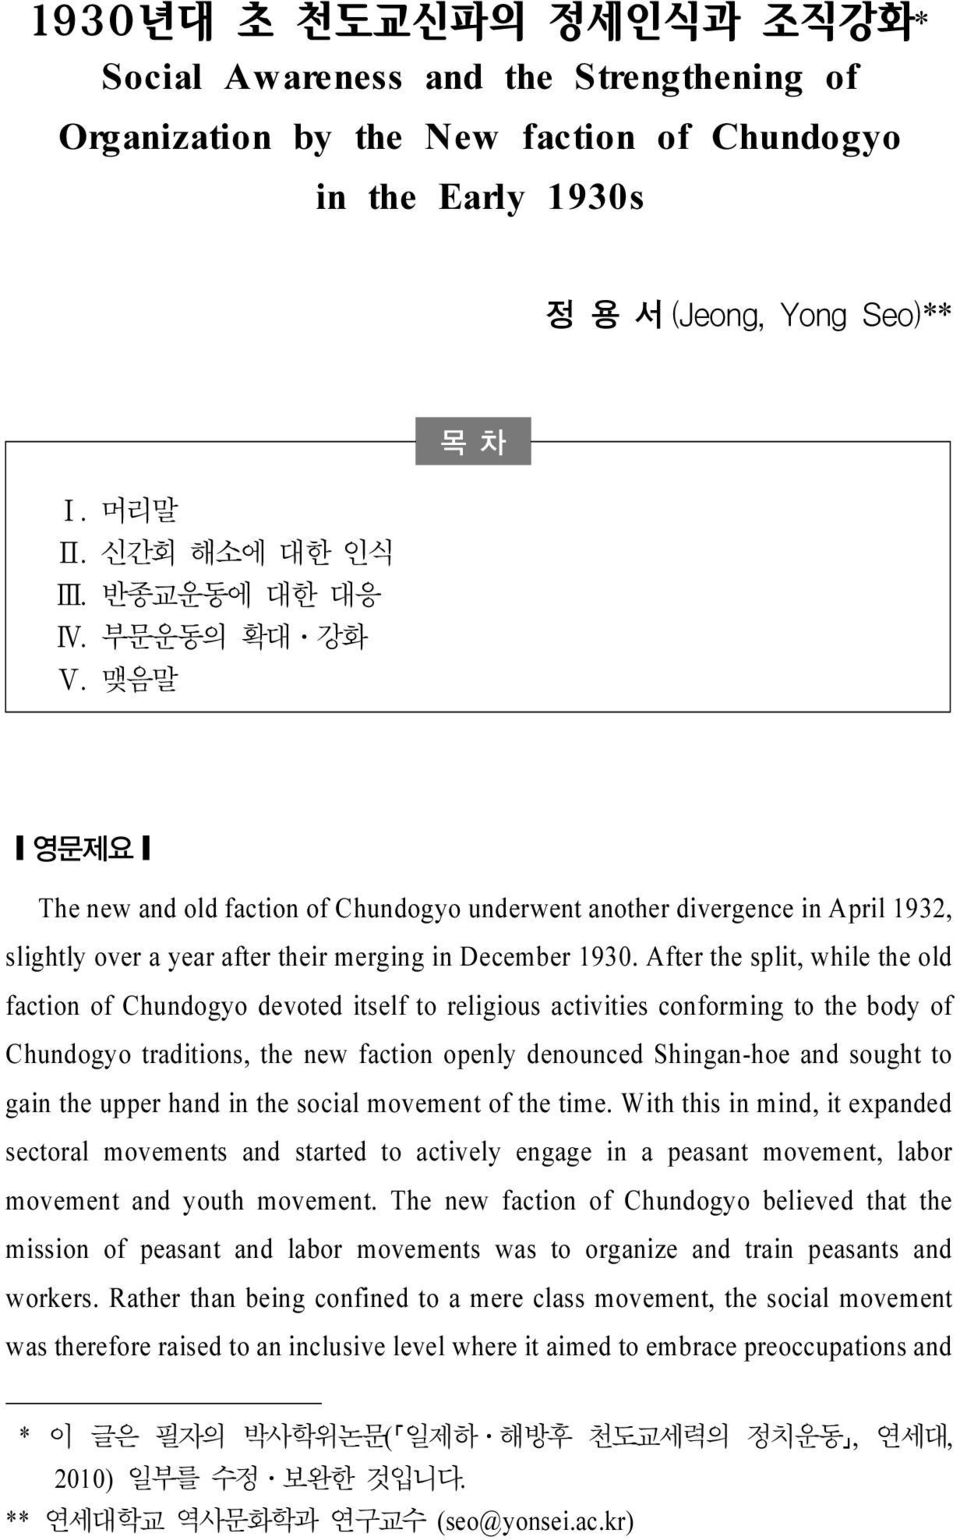 After the split, while the old faction of Chundogyo devoted itself to religious activities conforming to the body of Chundogyo traditions, the new faction openly denounced Shingan-hoe and sought to